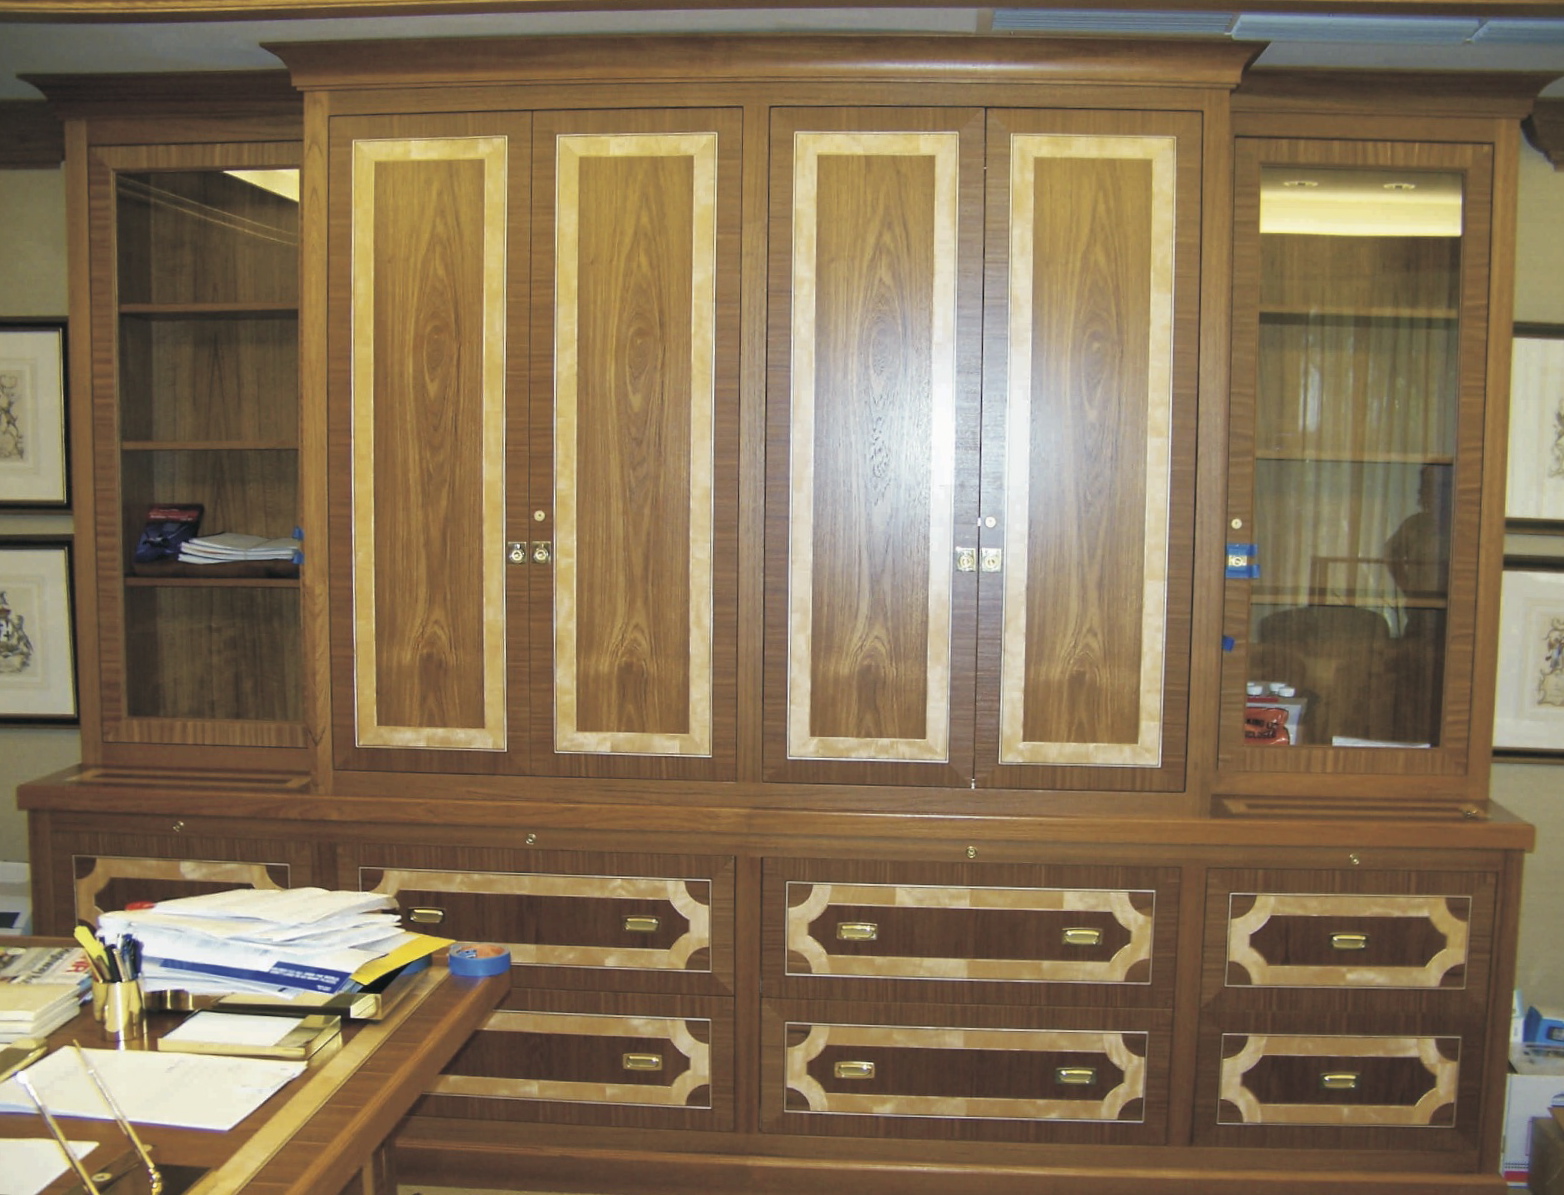 Corporate office credenza - West Palm Beach